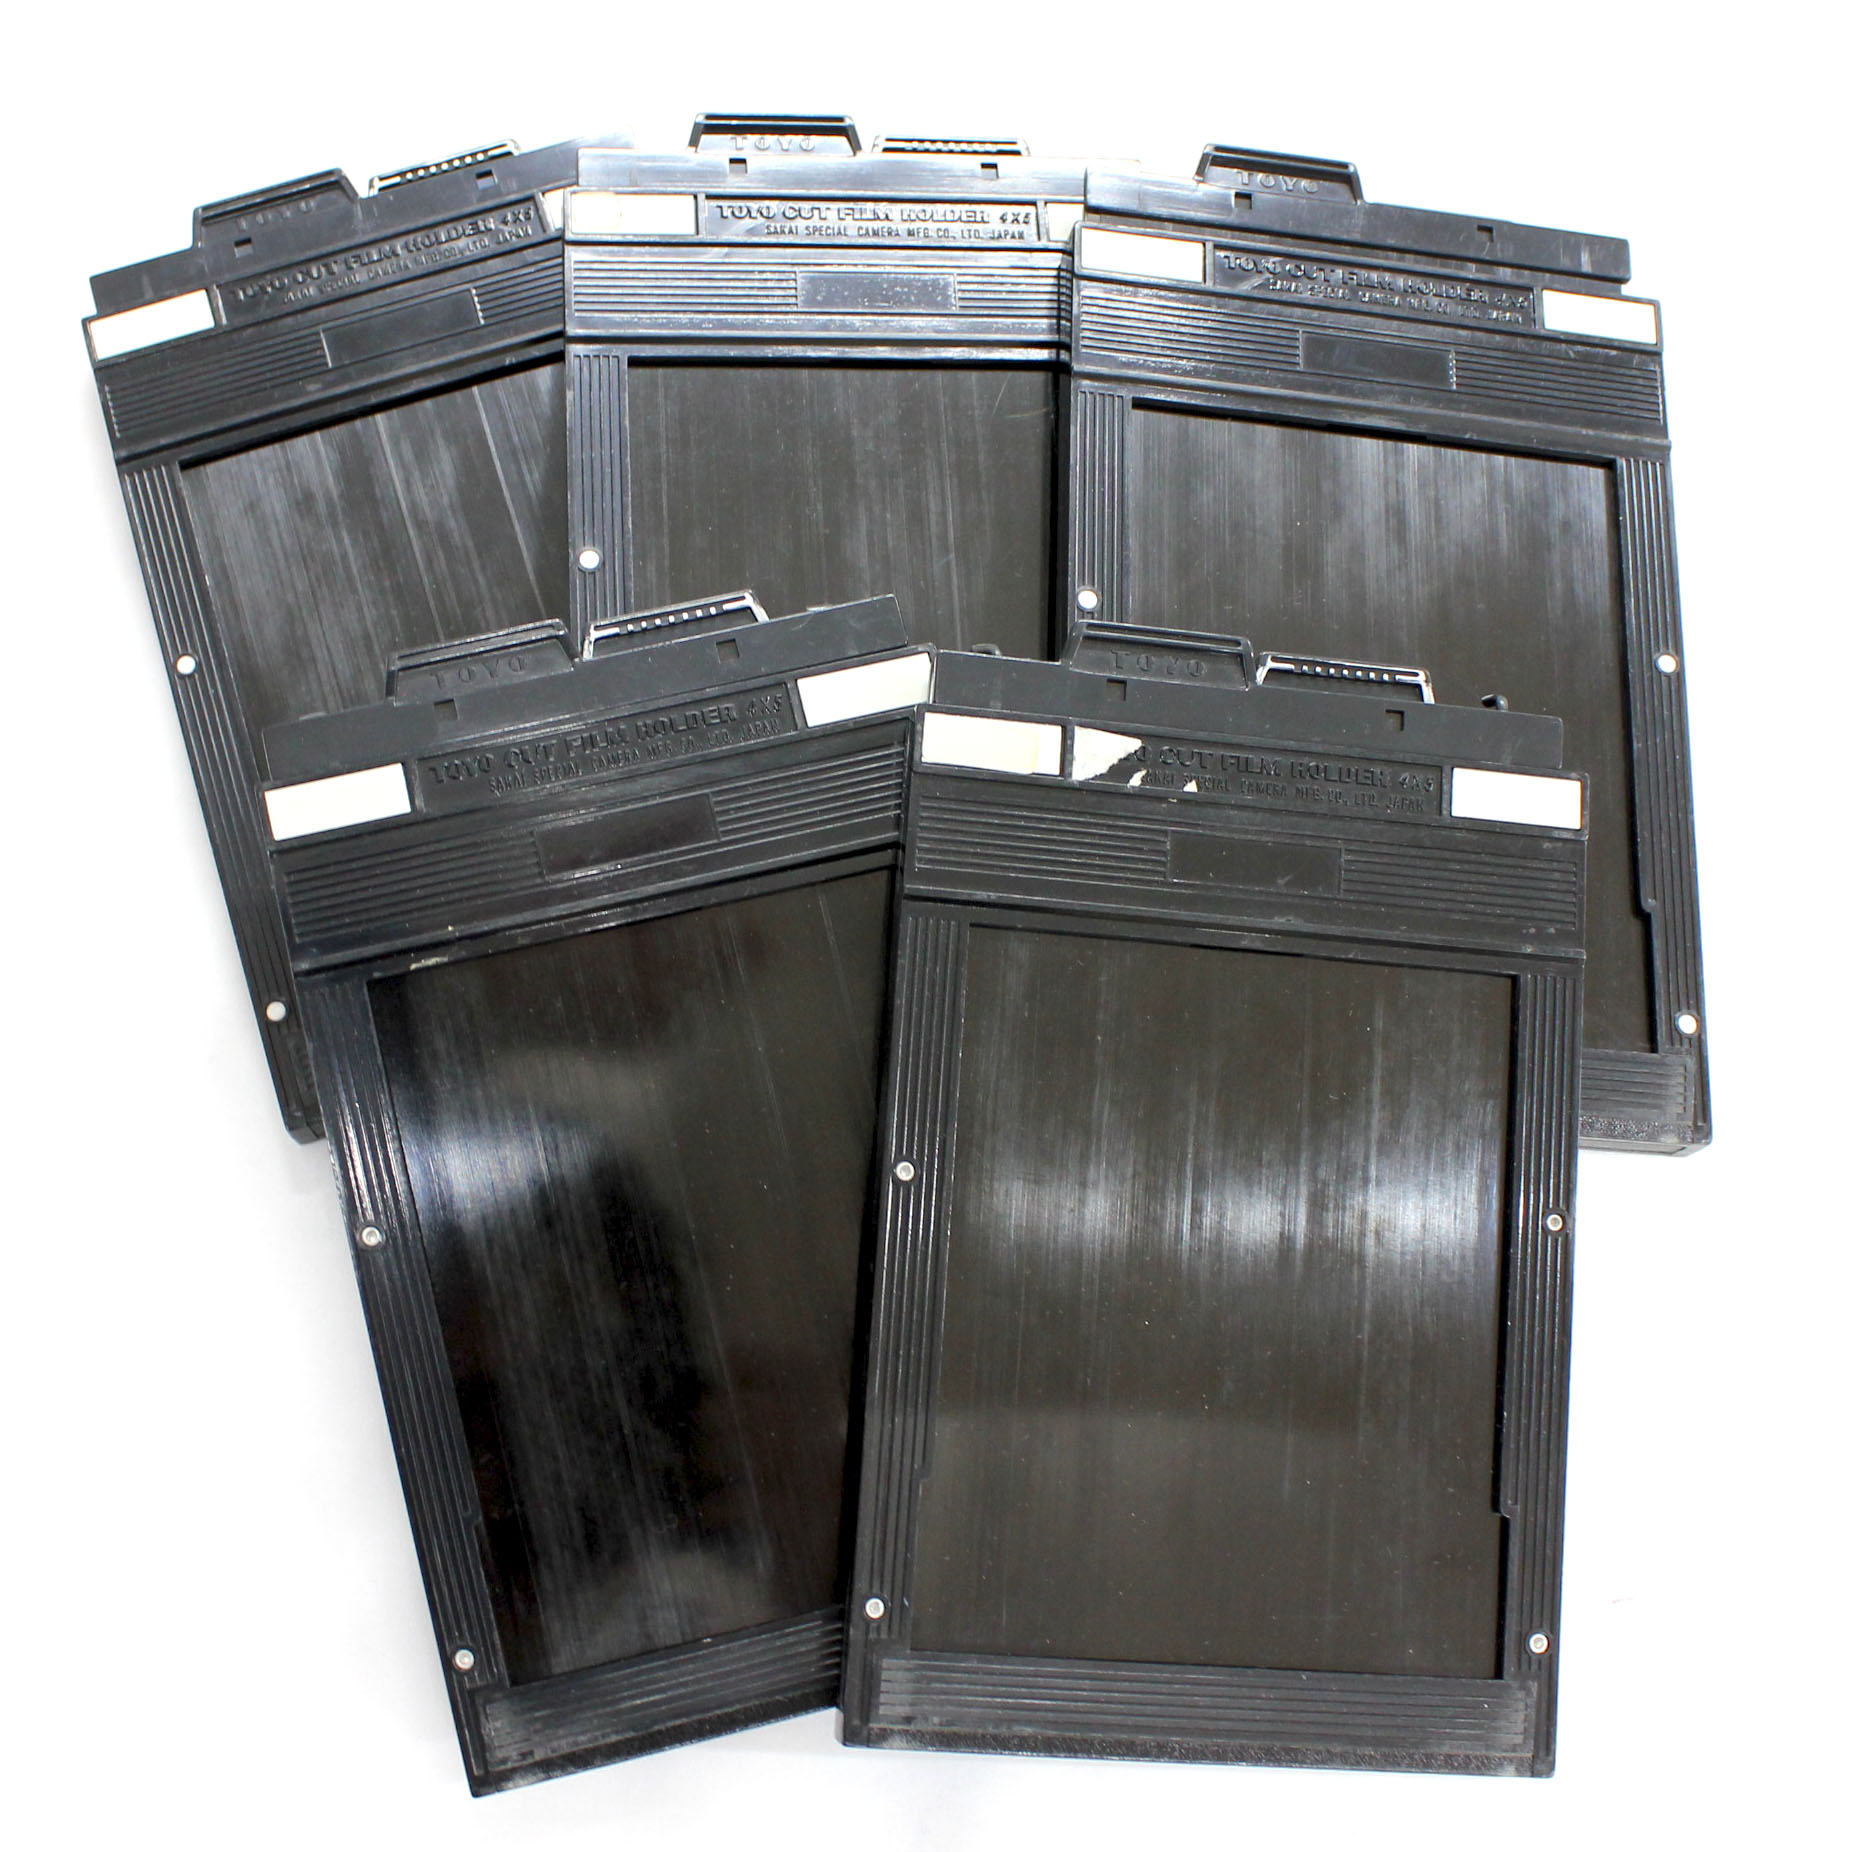 Toyo 4x5 Cut Film Holder Back Lot of 5 from Japan